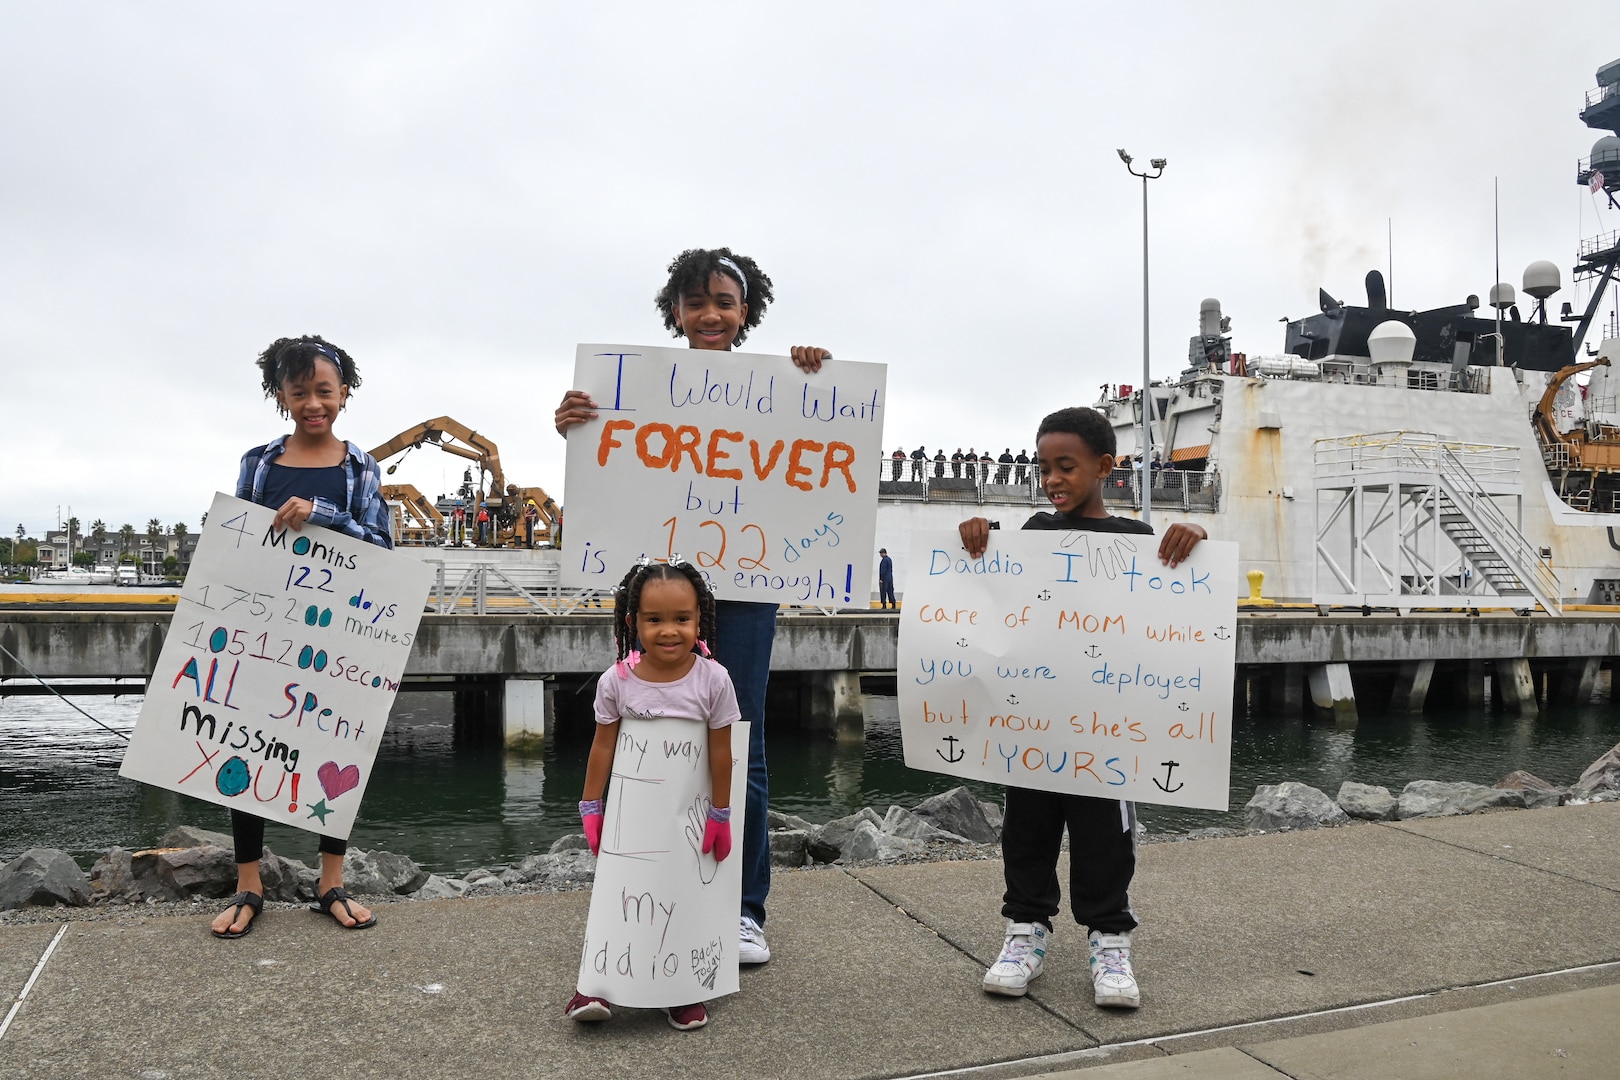 Family members hold signs while they wait for their dad to greet them after the Coast Guard Cutter Bertholf (WMSL 750) and crew returned to homeport in Alameda, Calif., Aug. 3, 2023. The Bertholf deployed for 120-days to the Bering Sea patrol in support of United States national security, U.S. fishing fleet safety and prosperity, and the protection of U.S. living marine resources. (U.S. Coast Guard photo by Senior Chief Petty Officer Charly Tautfest)